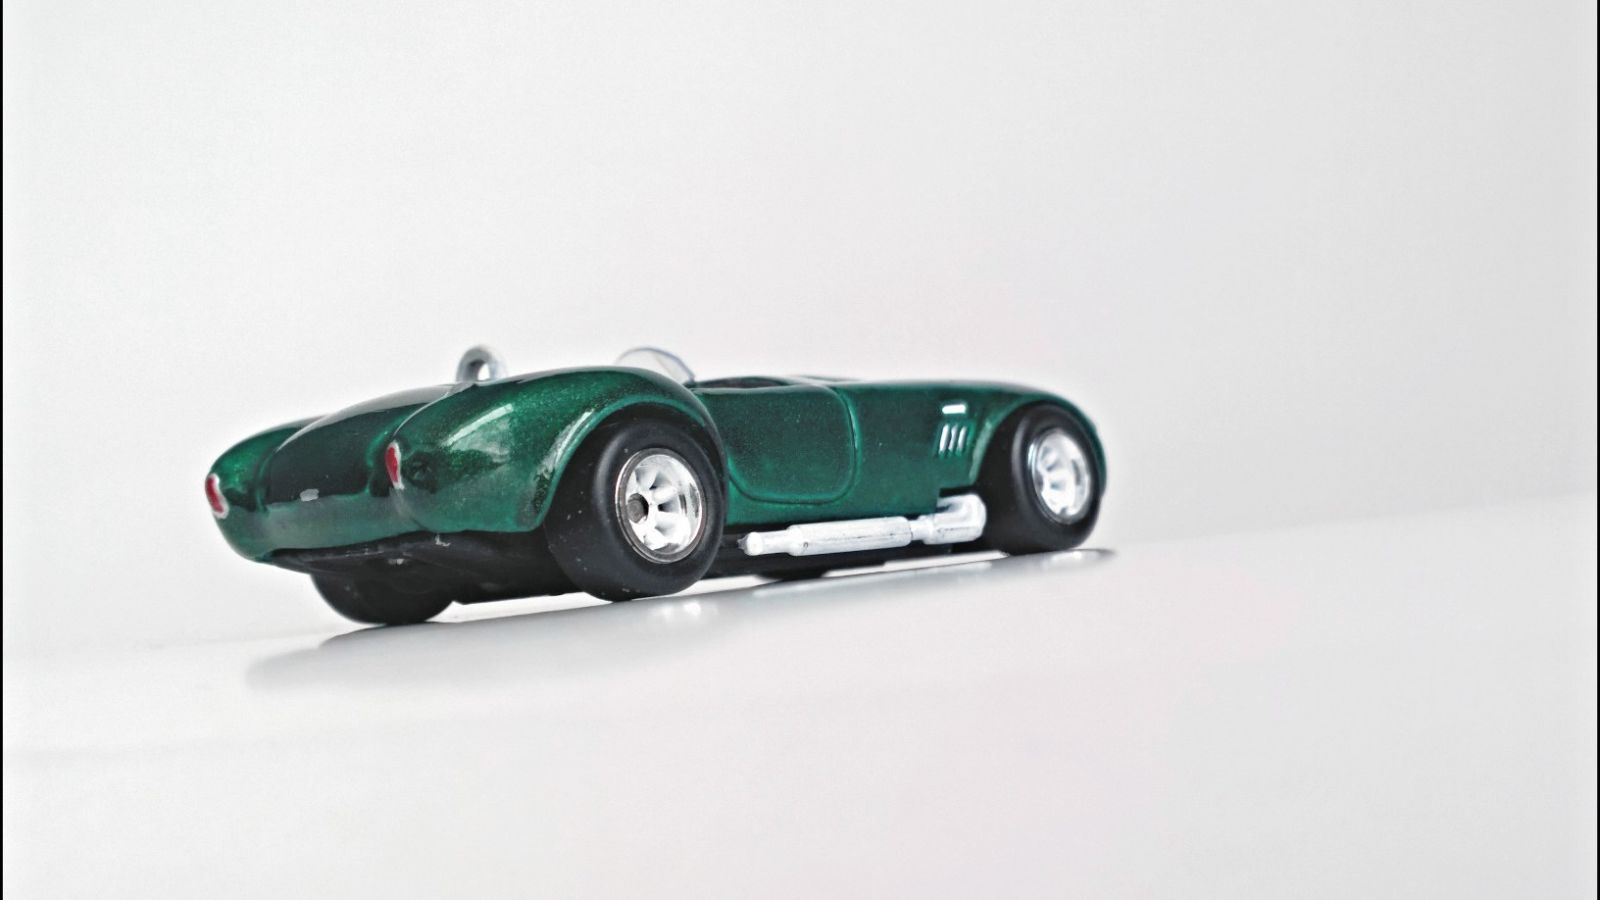 Illustration for article titled CUSTOM AC Cobra completed!!!